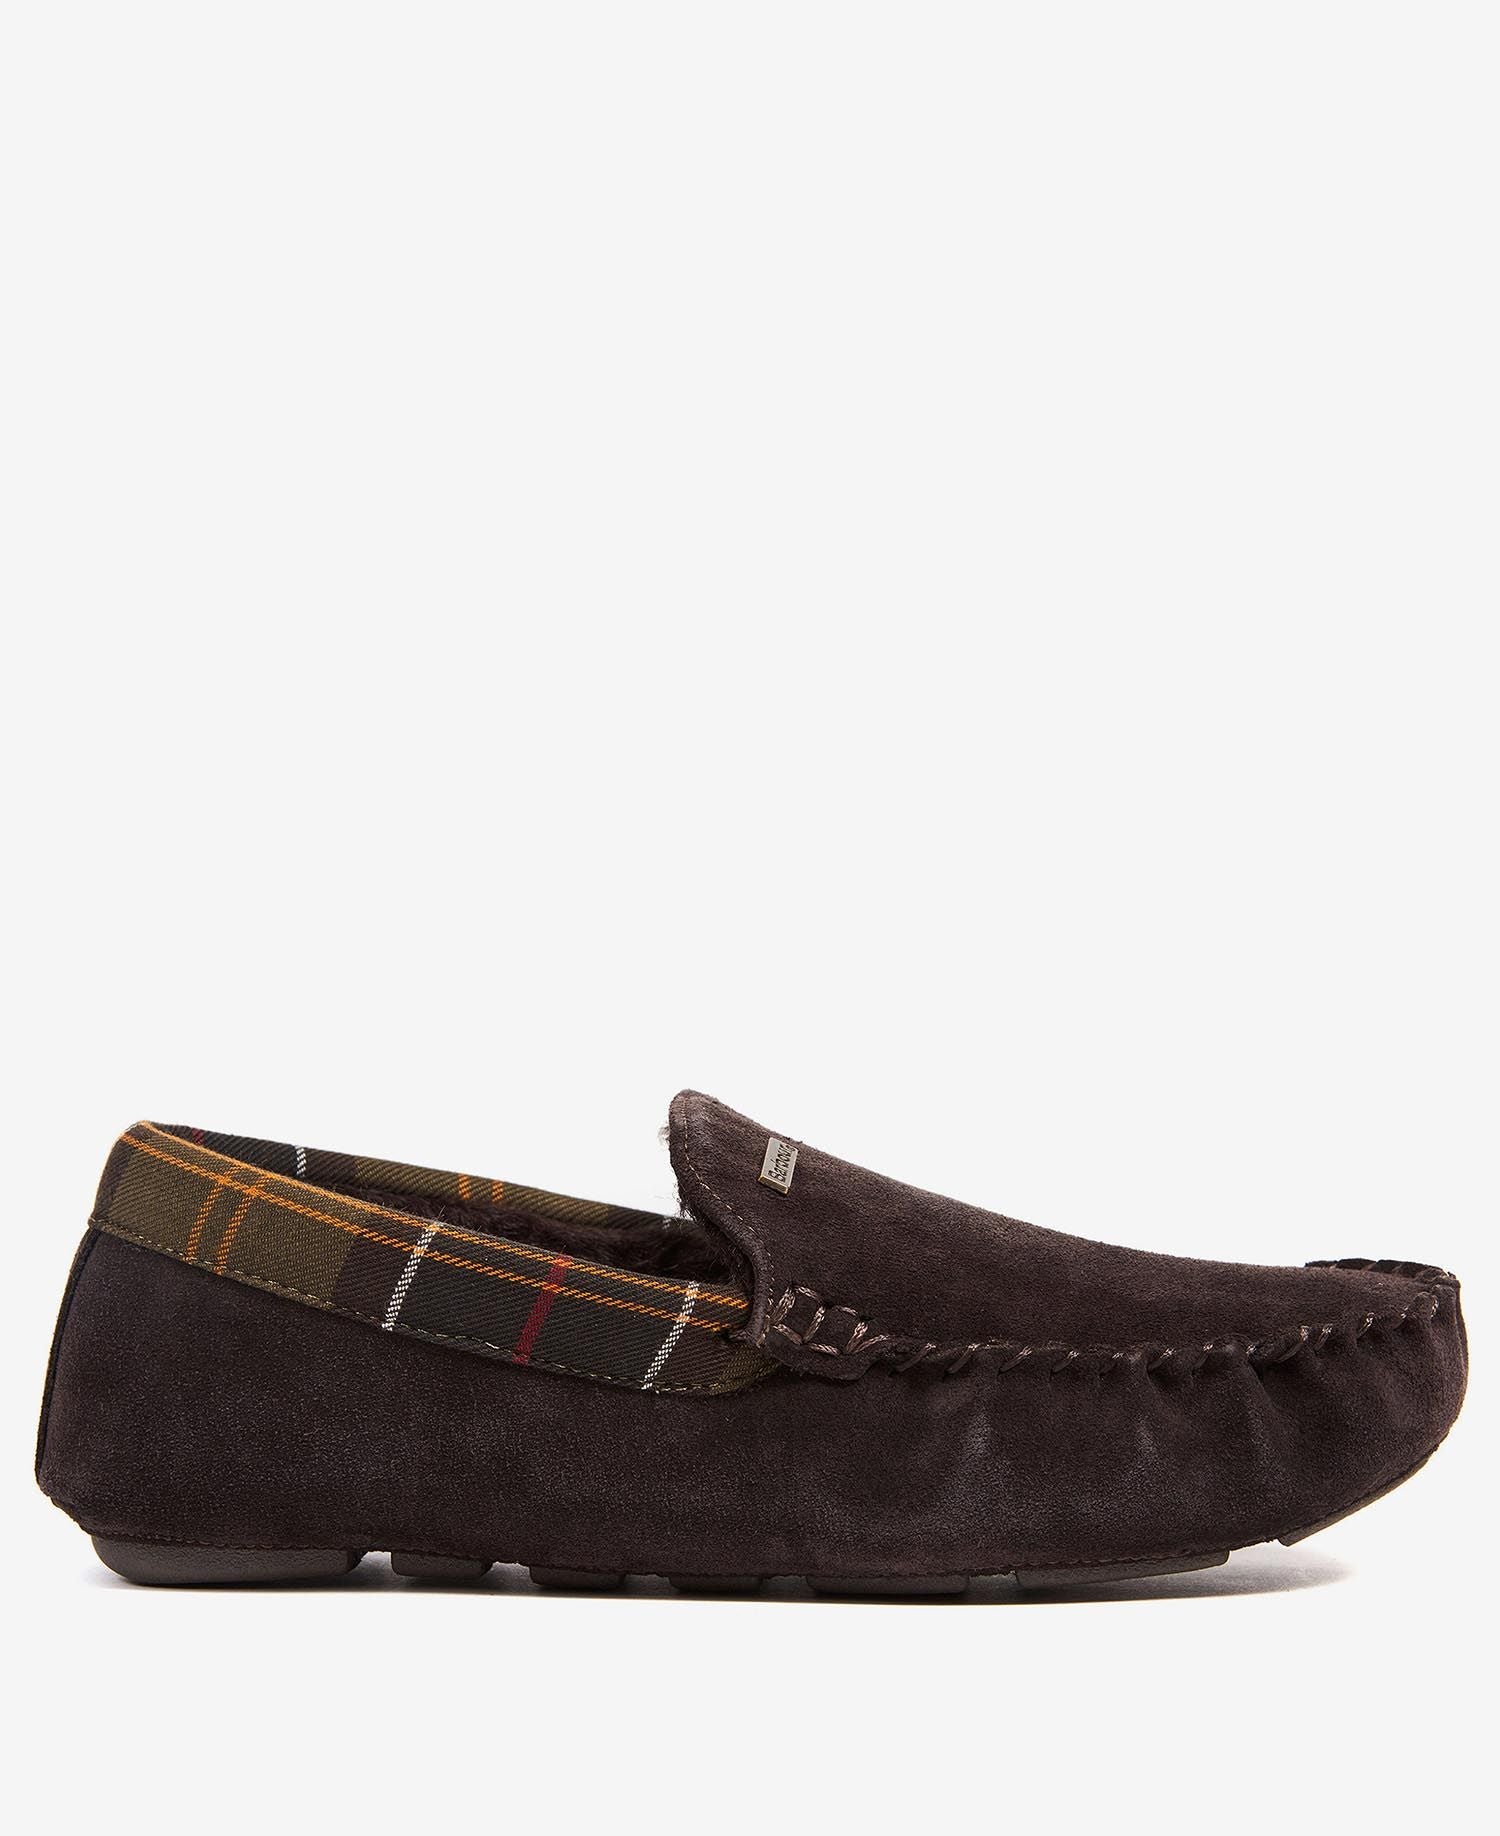 Monty Slippers - Brown Suede